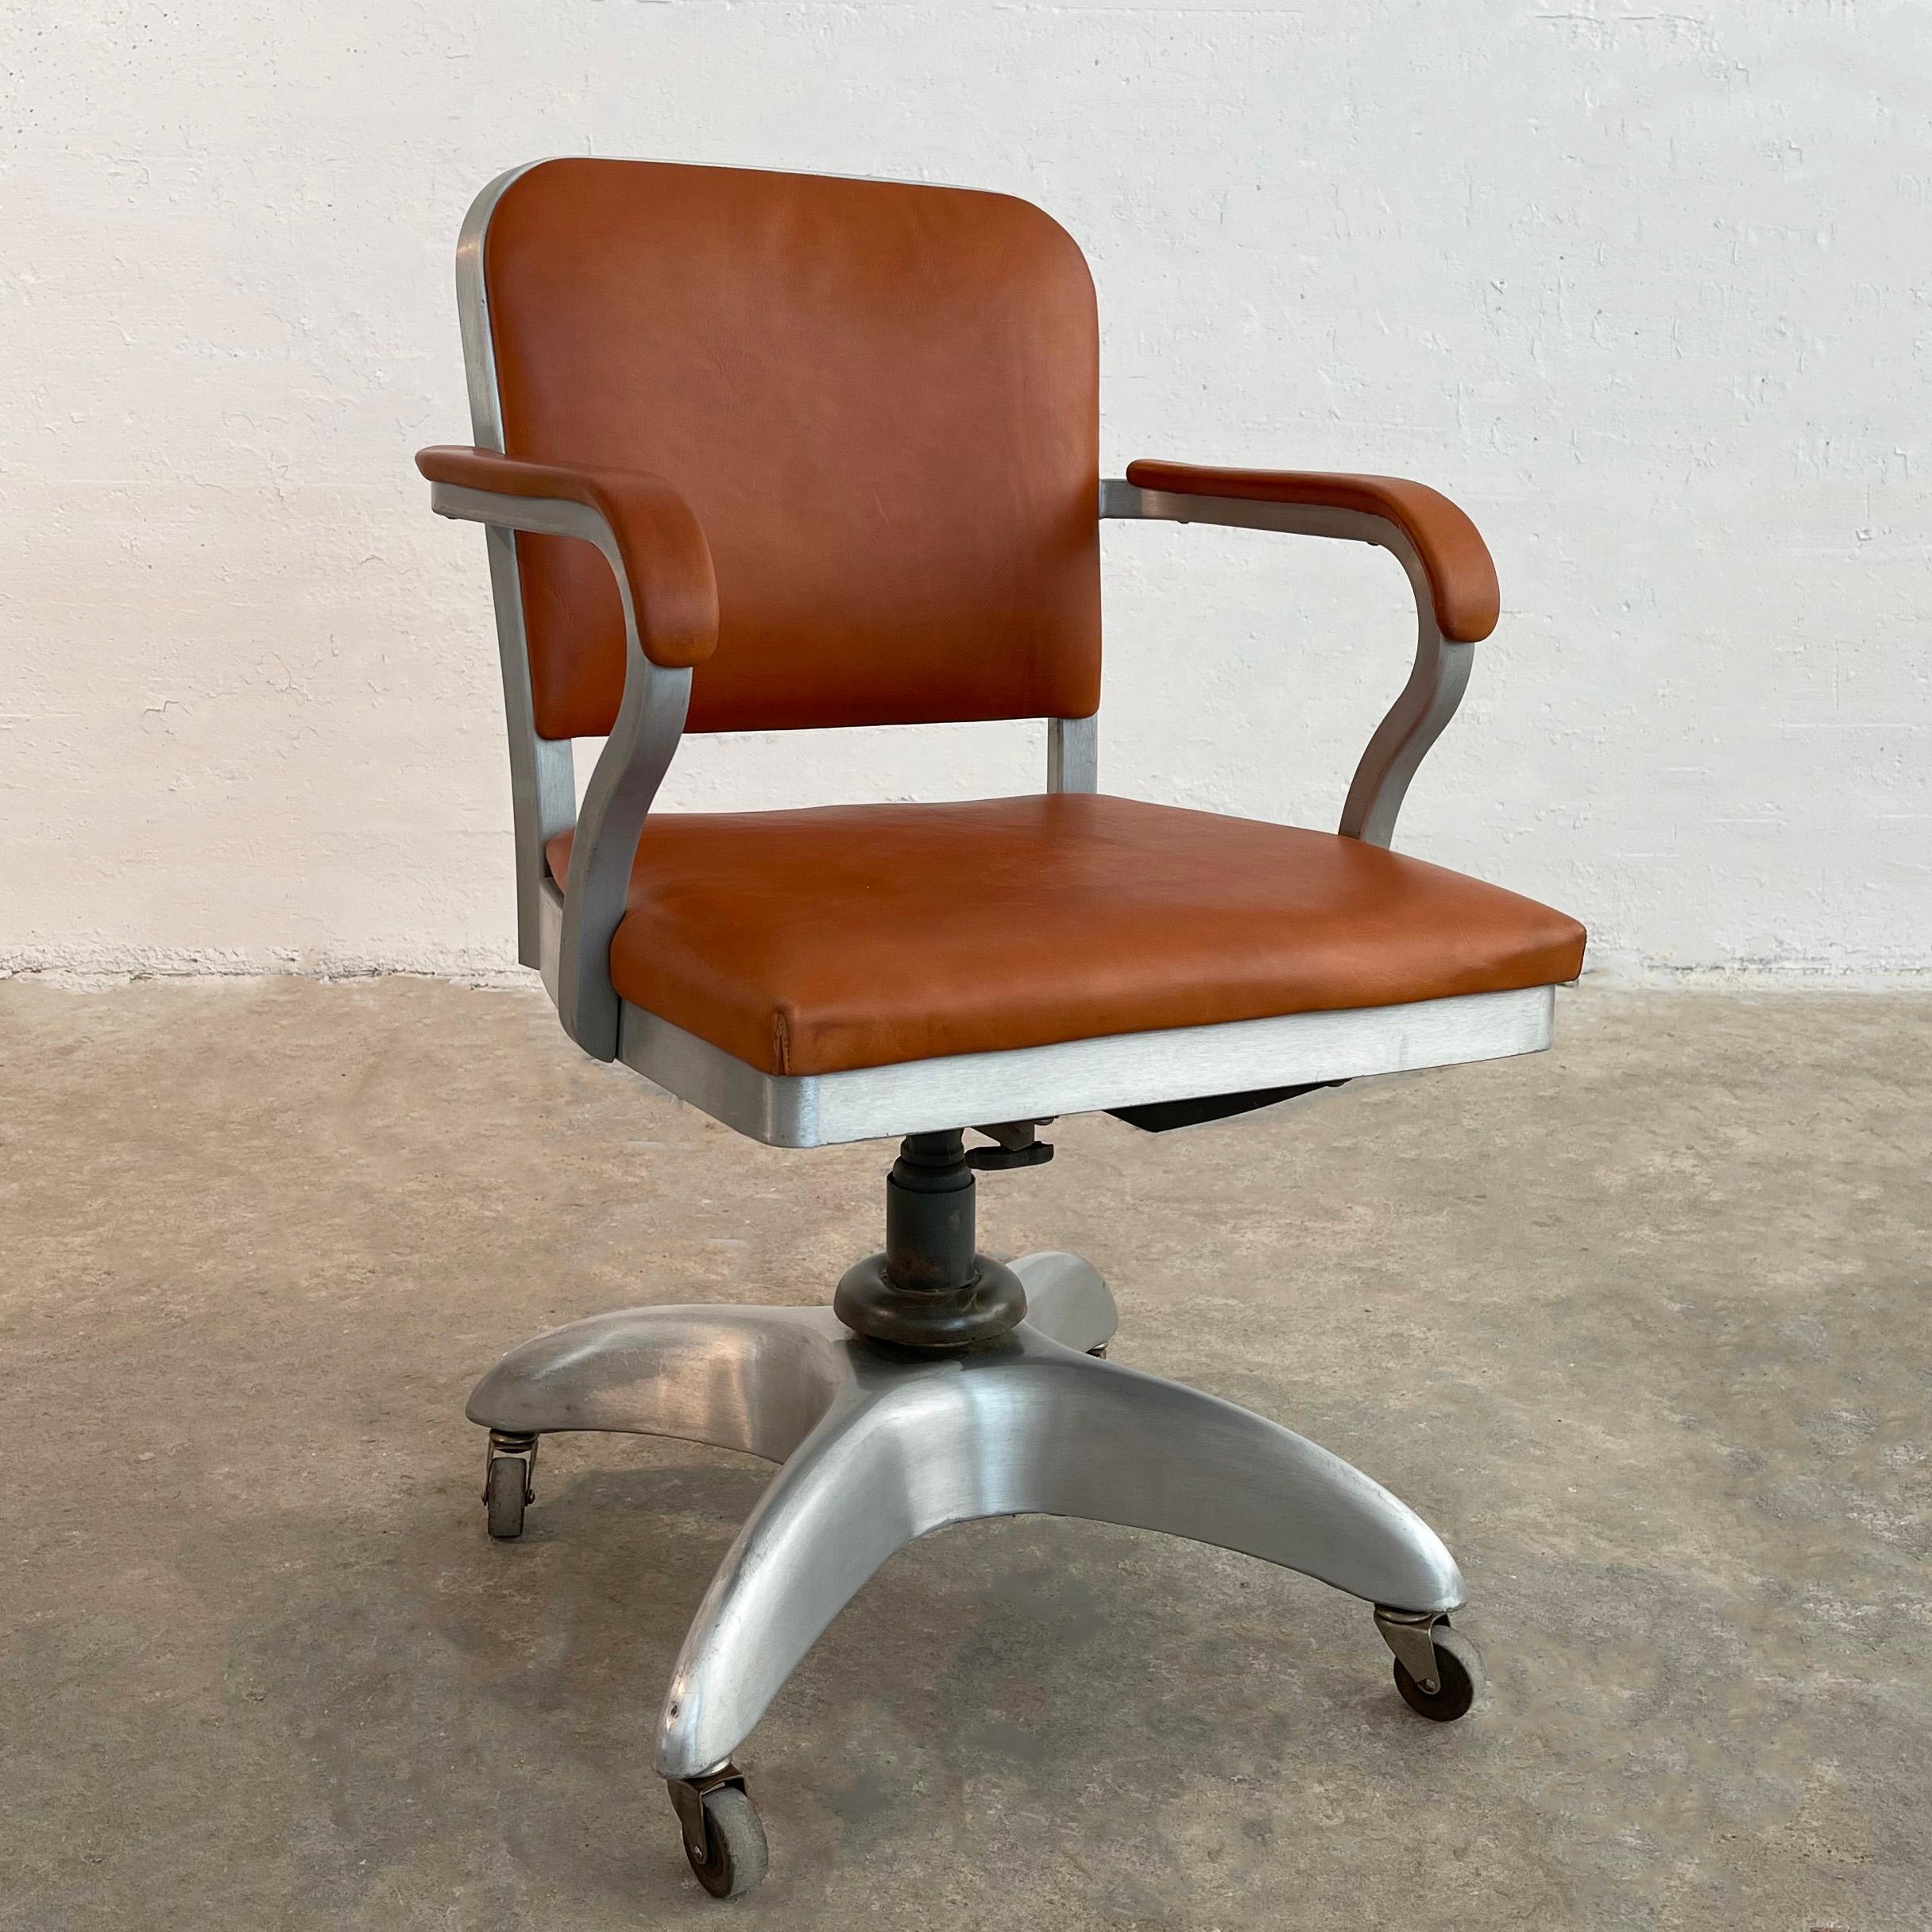 Iconic, mid-century modern, machine-age, rolling, swivel desk armchair by Goodform General Fireproofing Co. features a height and tilt adjustable, brushed aluminum frame with newly upholstered seat and back in rust leather. The arm height measured